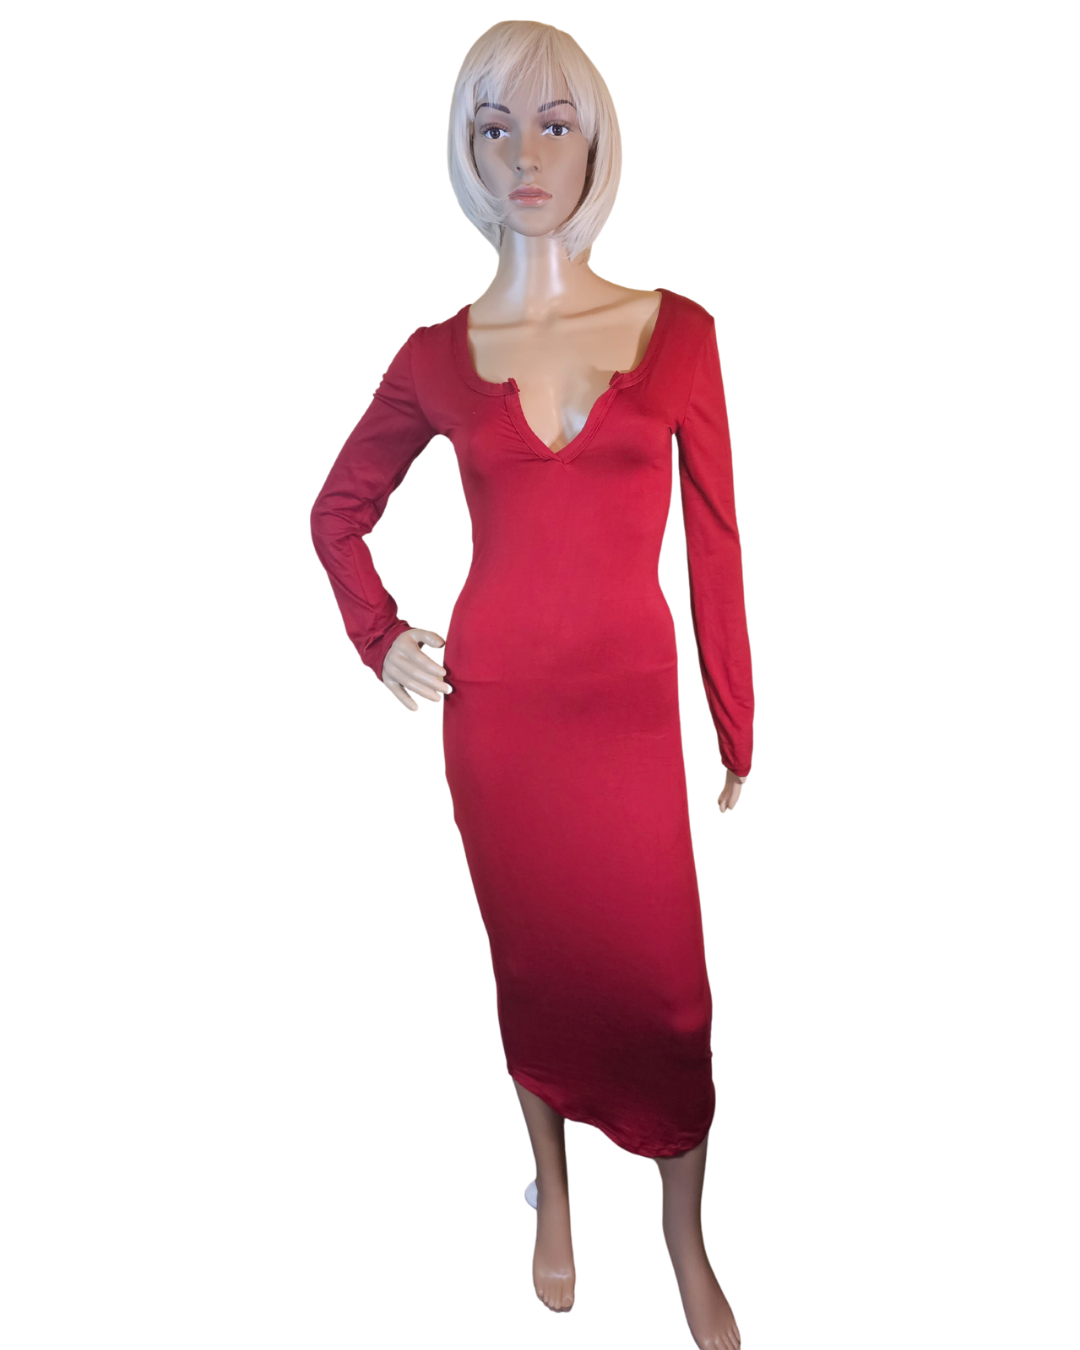 small-large, red soft material dress that fits your curves and has a v-neck in the front. the dress goes pass your knees. long sleeves